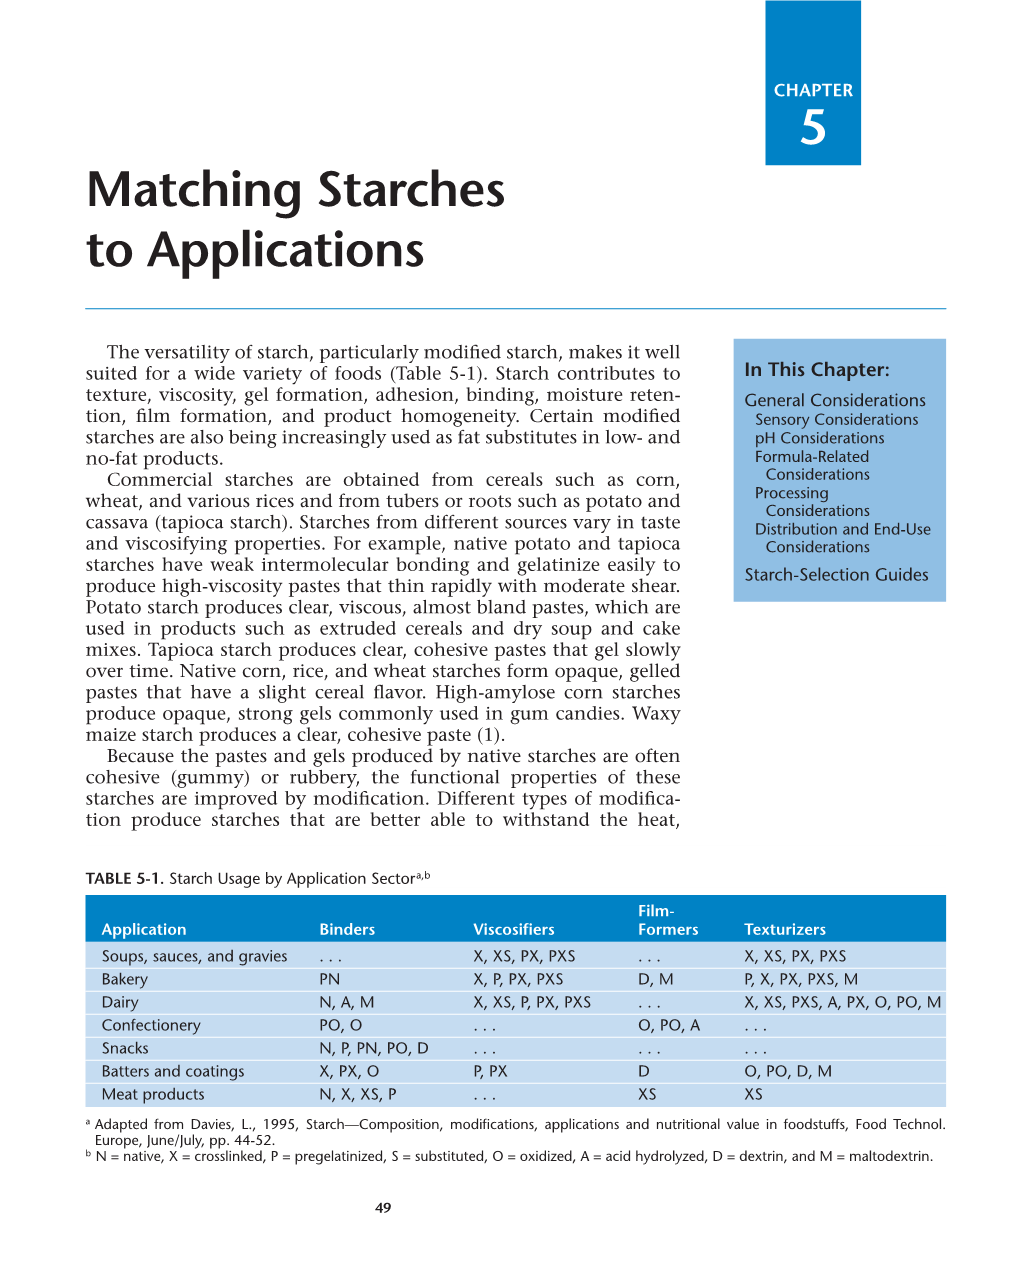 5 Matching Starches to Applications